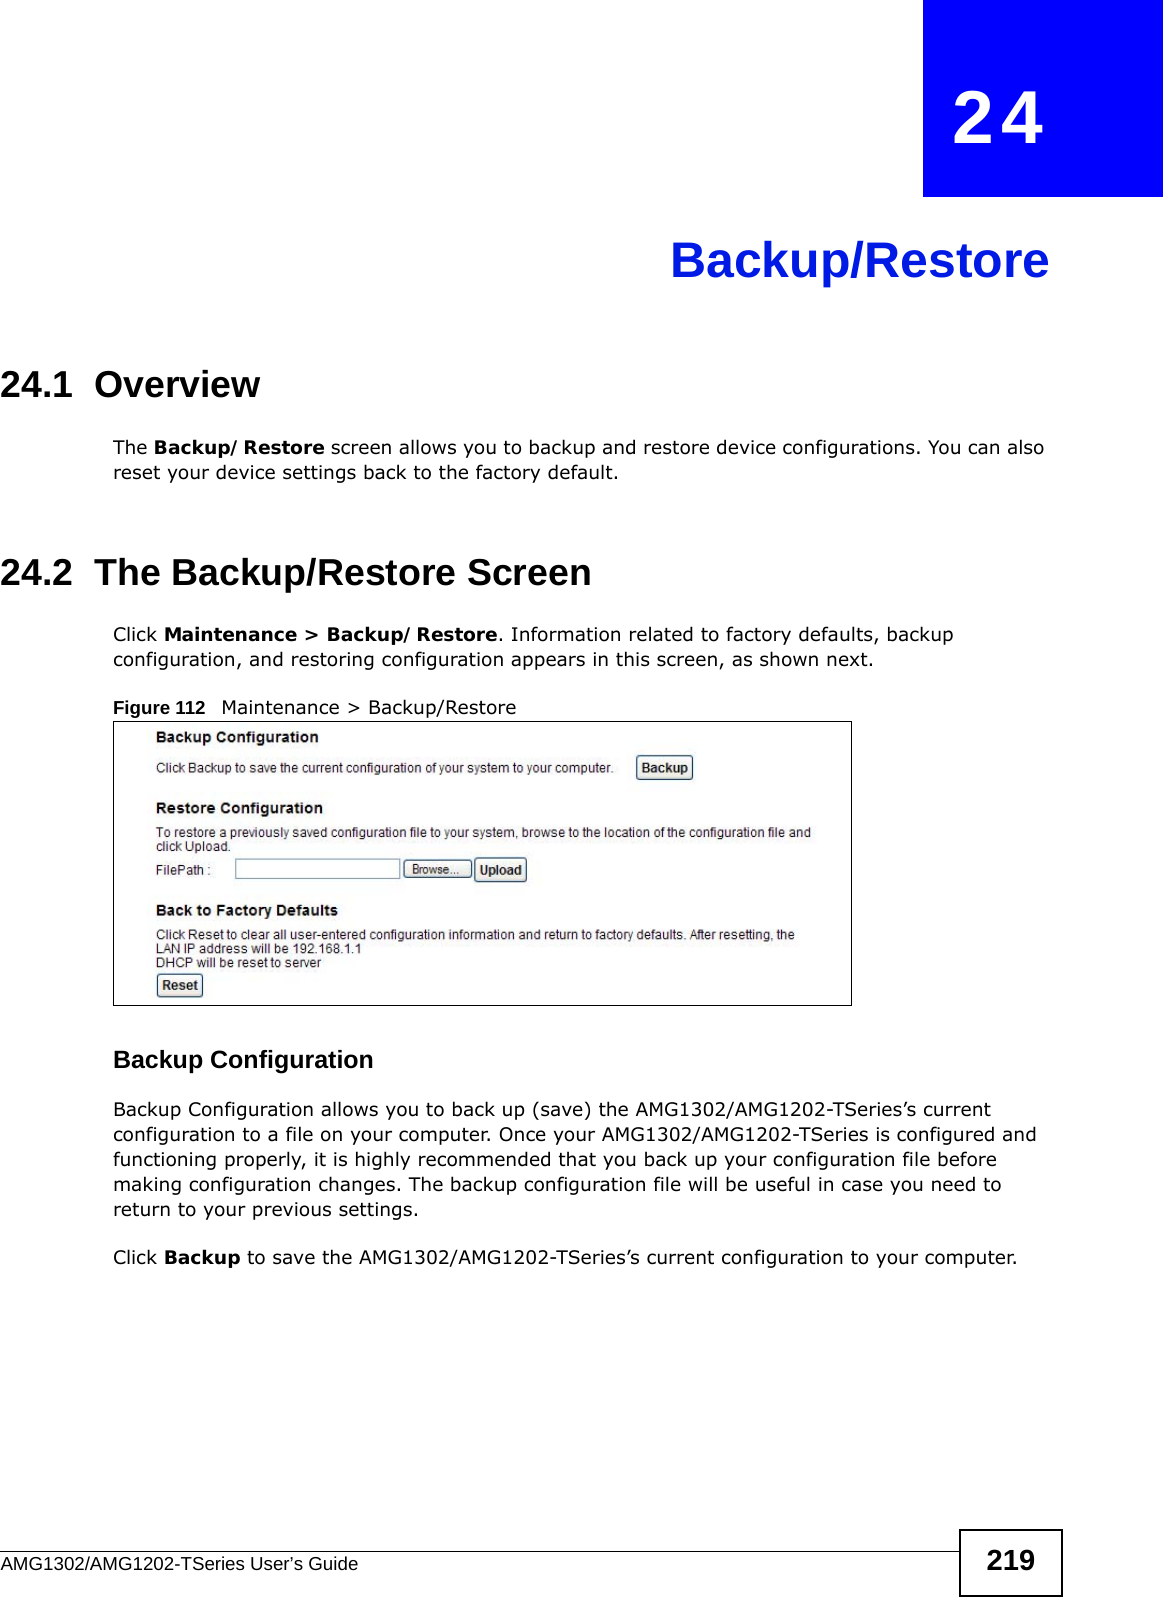 AMG1302/AMG1202-TSeries User’s Guide 219CHAPTER   24Backup/Restore24.1  OverviewThe Backup/Restore screen allows you to backup and restore device configurations. You can also reset your device settings back to the factory default.24.2  The Backup/Restore Screen Click Maintenance &gt; Backup/Restore. Information related to factory defaults, backup configuration, and restoring configuration appears in this screen, as shown next.Figure 112   Maintenance &gt; Backup/RestoreBackup Configuration Backup Configuration allows you to back up (save) the AMG1302/AMG1202-TSeries’s current configuration to a file on your computer. Once your AMG1302/AMG1202-TSeries is configured and functioning properly, it is highly recommended that you back up your configuration file before making configuration changes. The backup configuration file will be useful in case you need to return to your previous settings. Click Backup to save the AMG1302/AMG1202-TSeries’s current configuration to your computer.